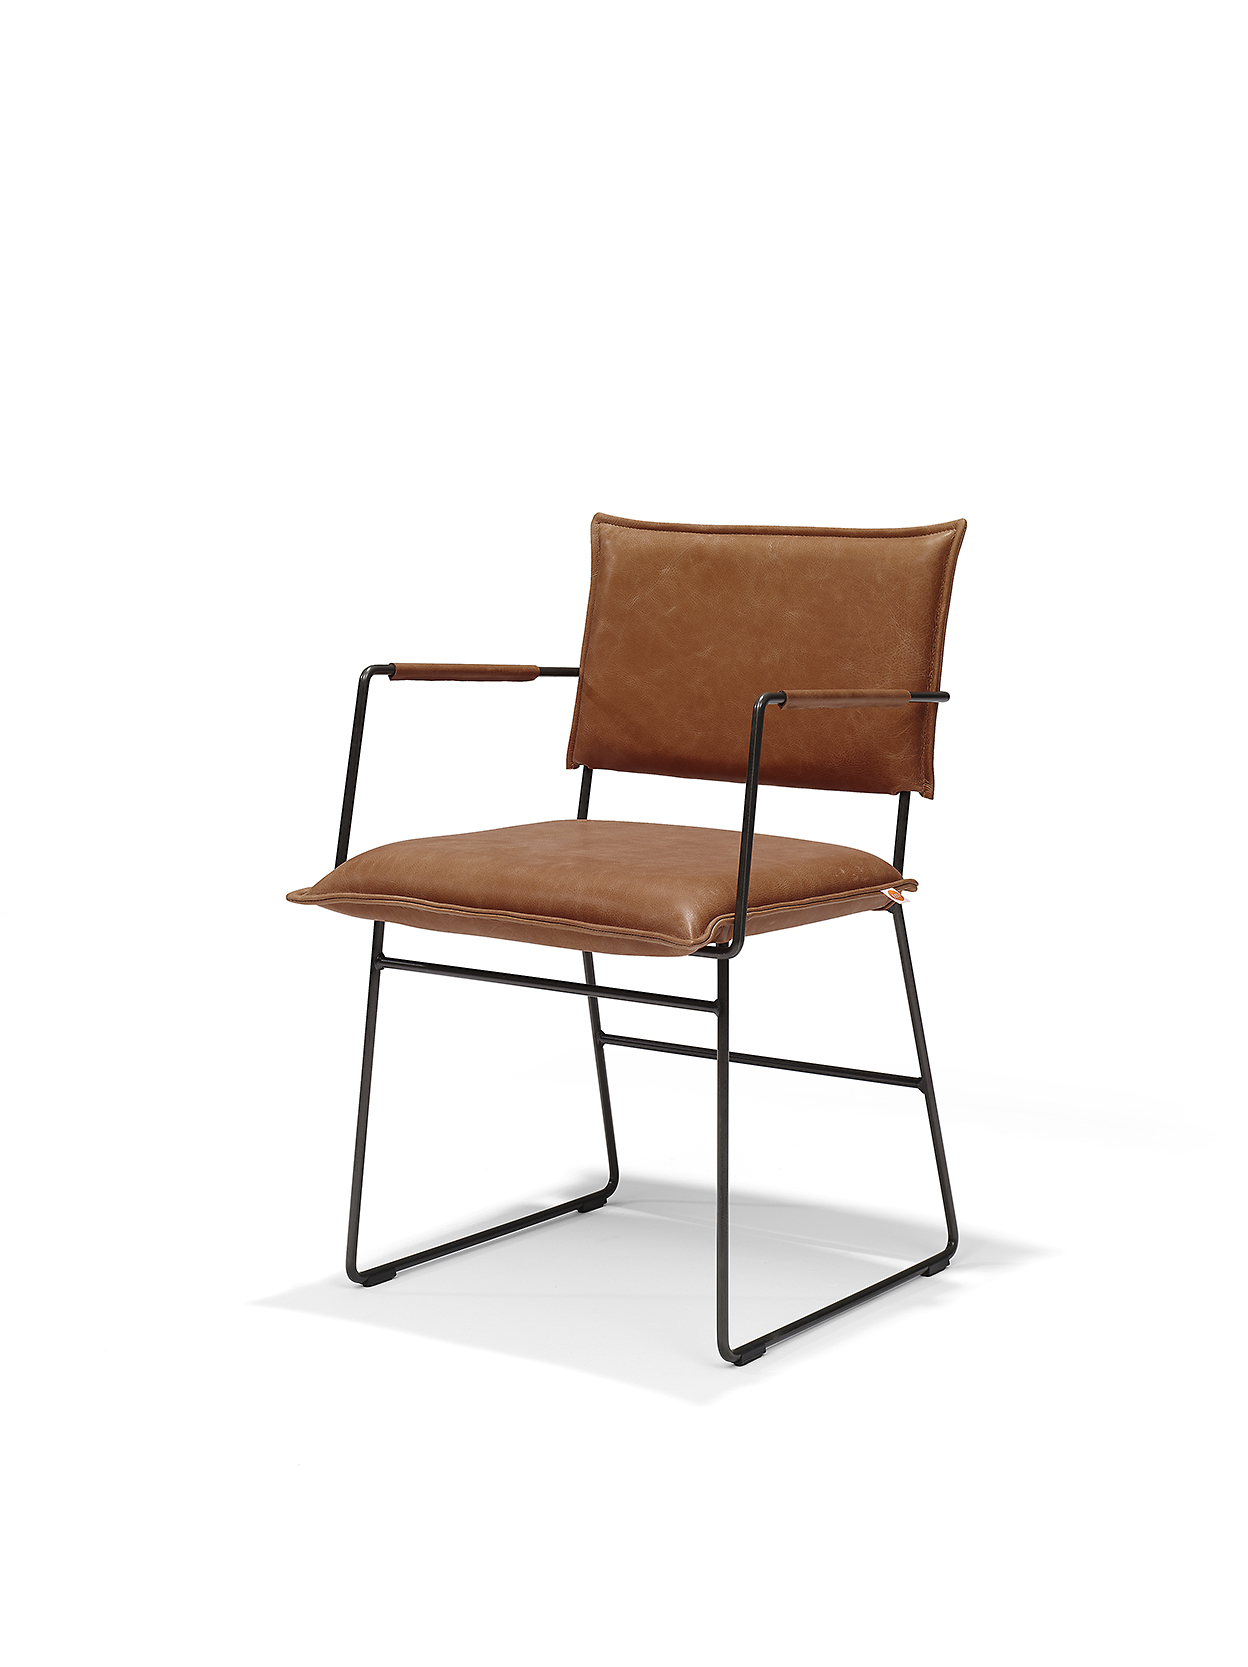 Norman Chair With Arm Bonanza Tan Pers LR